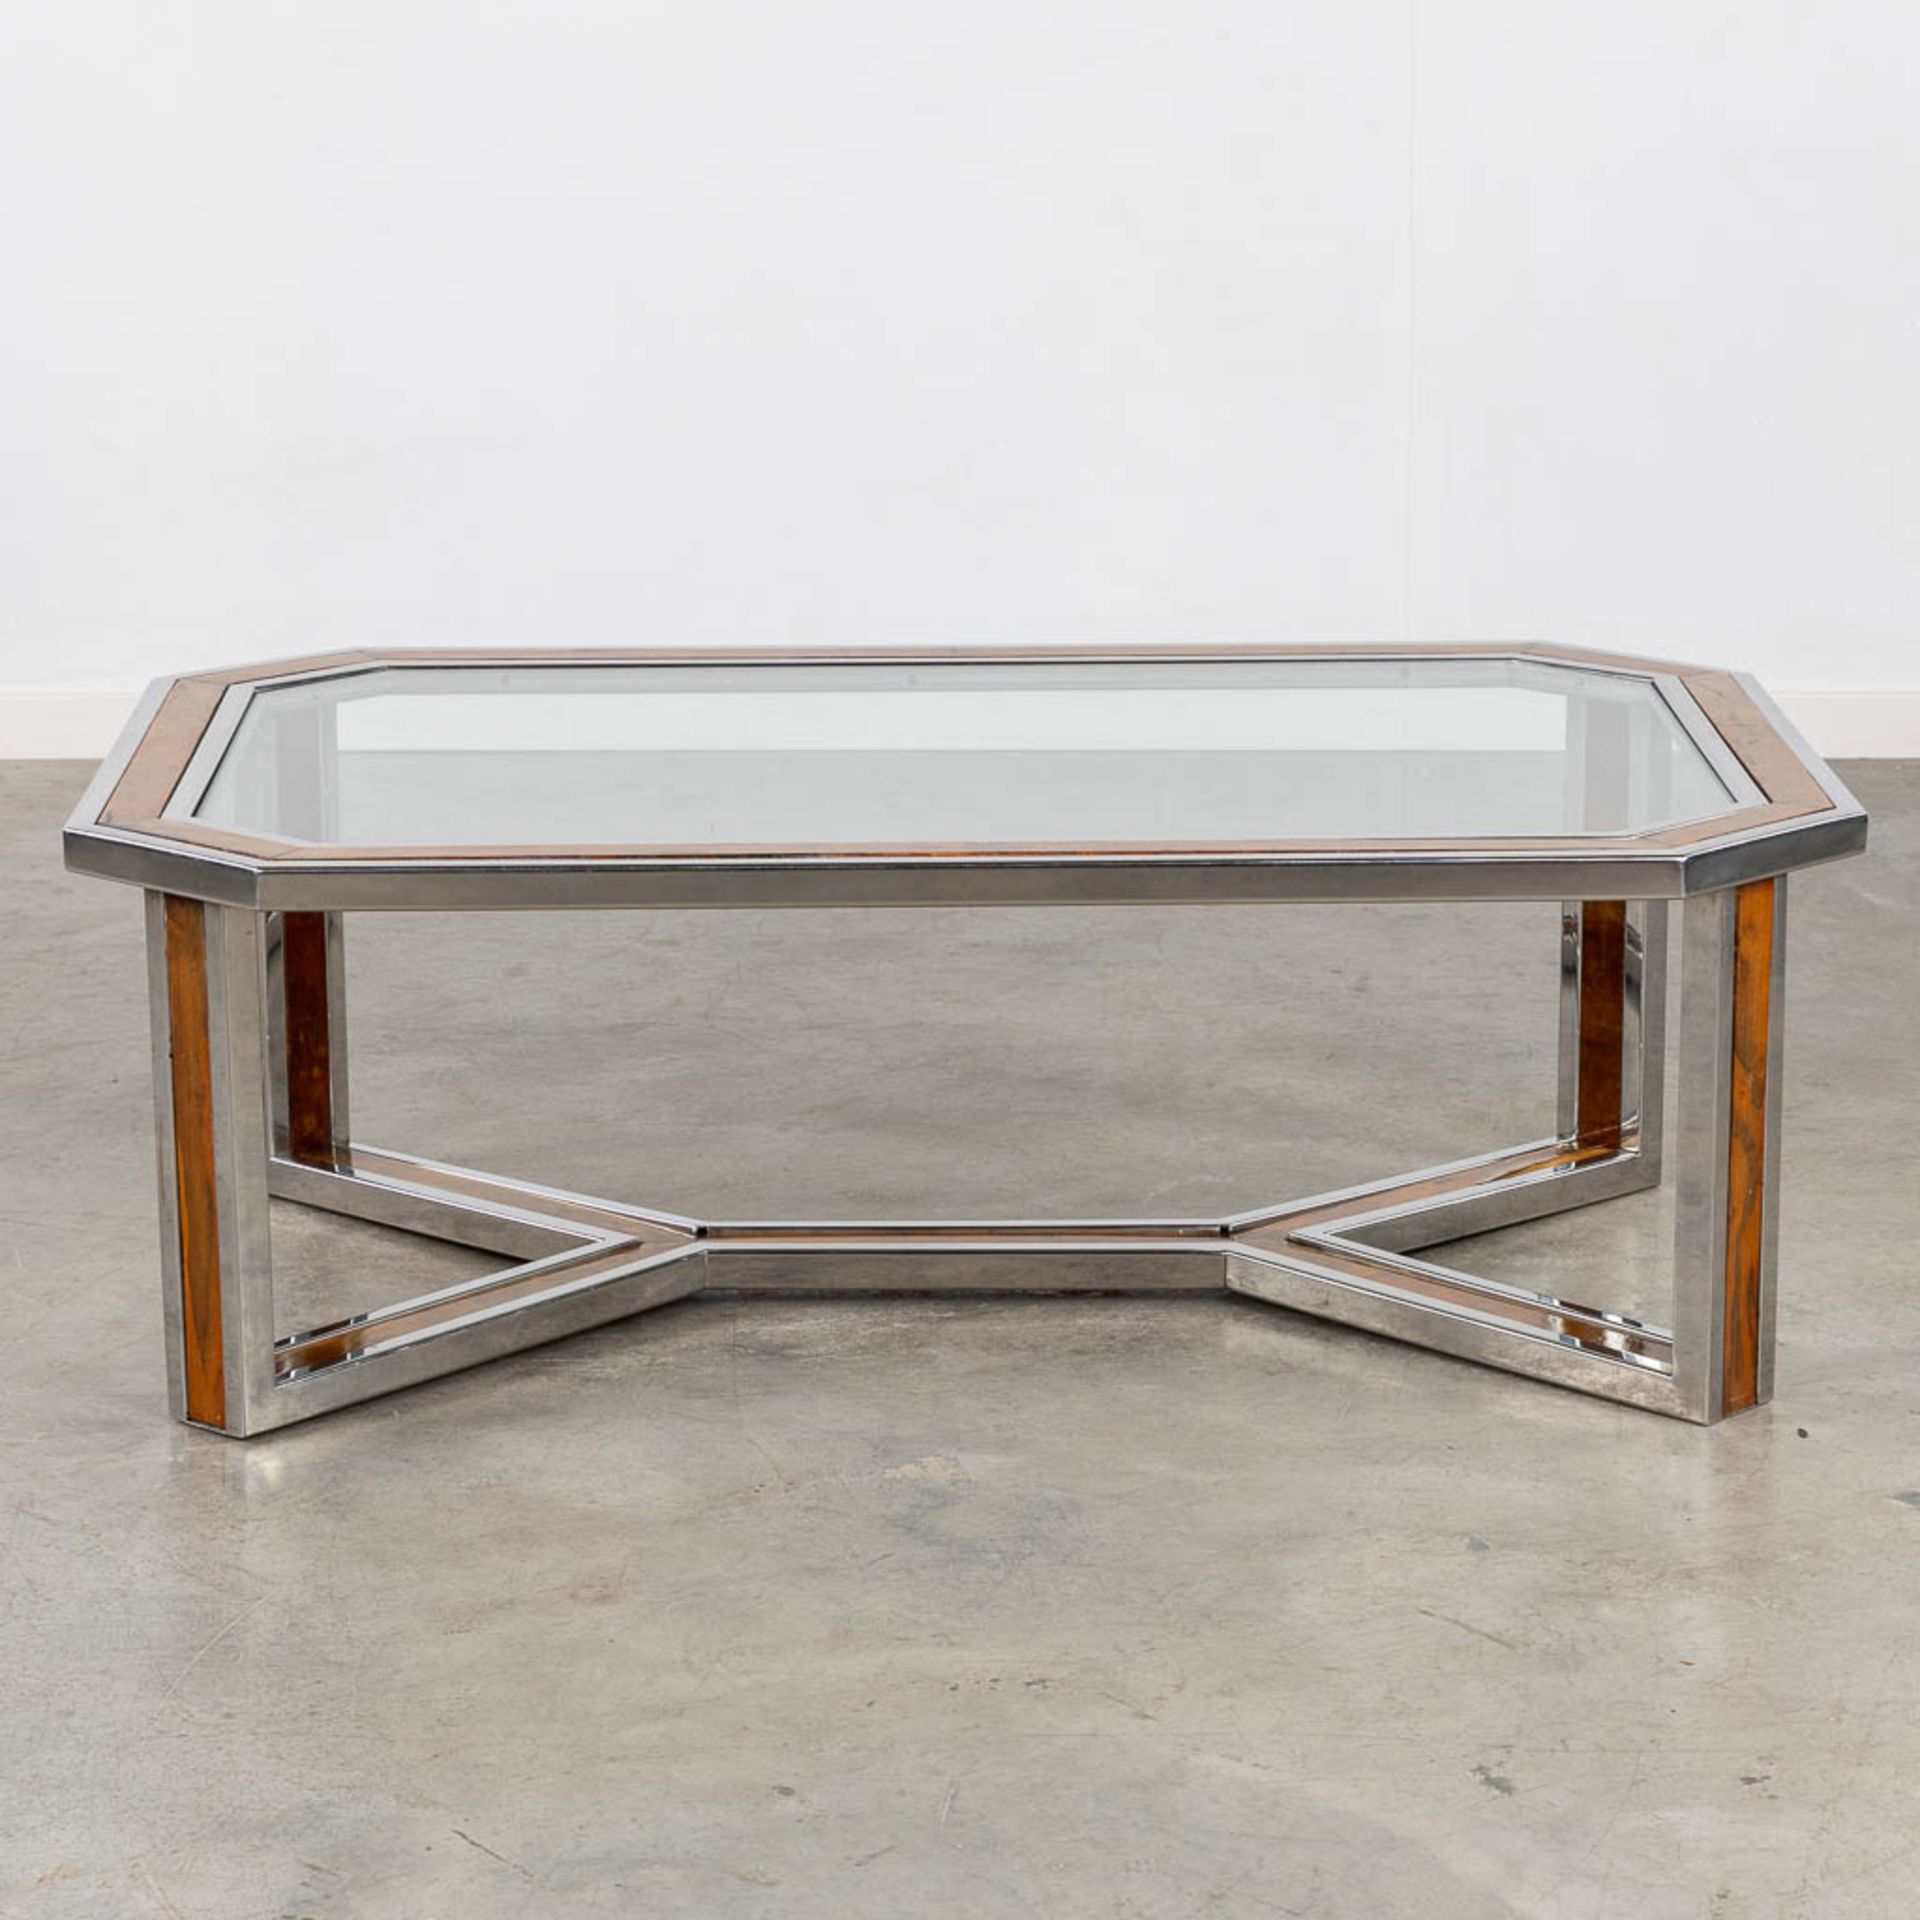 A coffee table, chrome with a faux wood inlay and a glass top. (L:80 x W:120 x H:40 cm) - Image 5 of 10